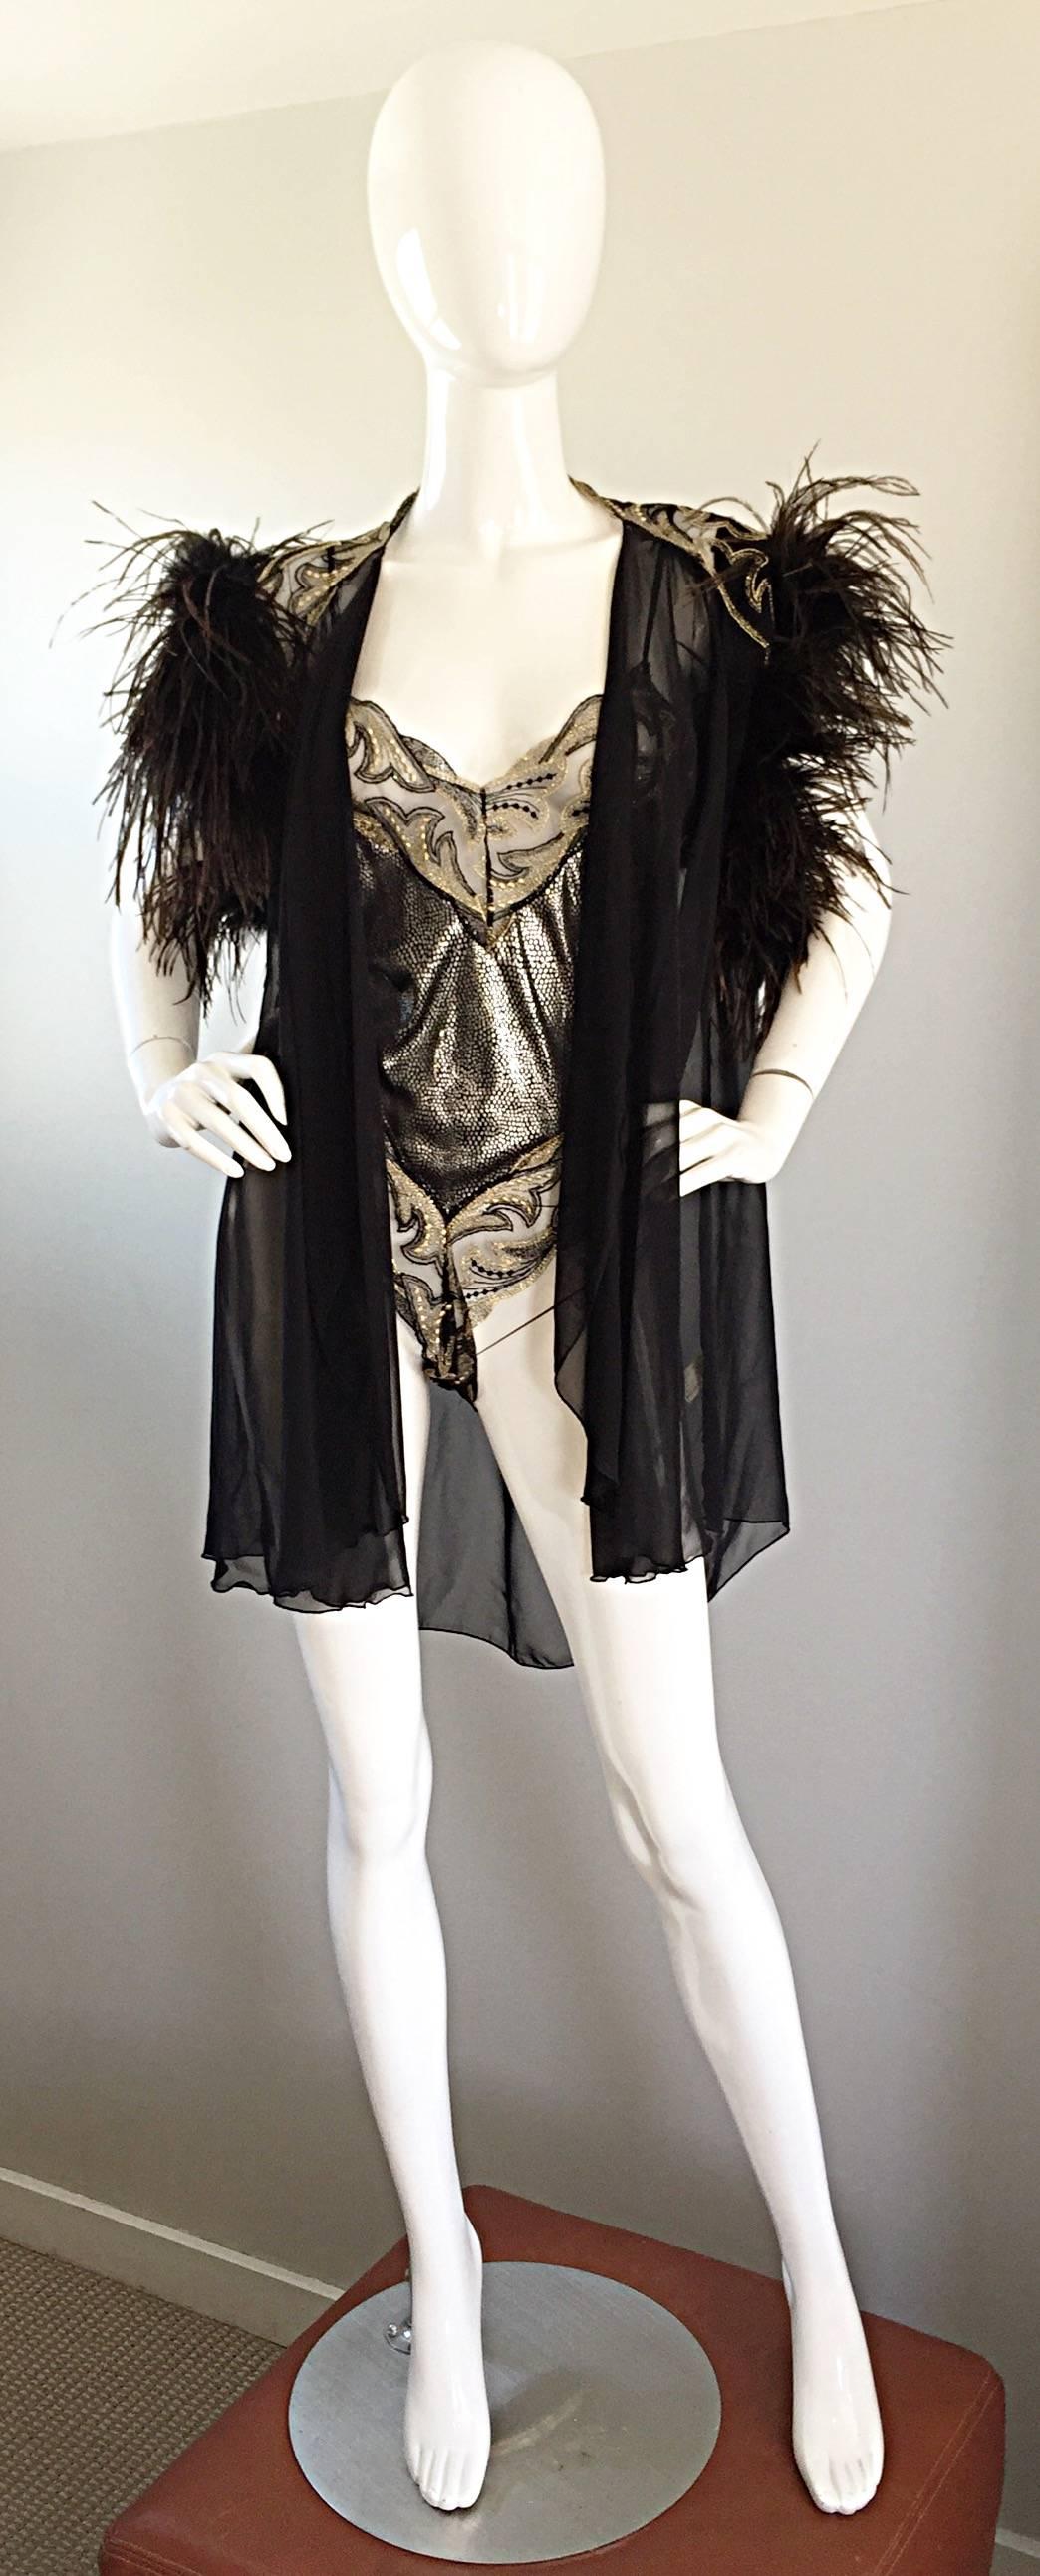 Incredible rare vintage early 80s BOB MACKIE for Elizabeth Arden teddy / bodysuit and chiffon vest, with hand-sewn ostrich feathers at the sleeves! Hollywood glamour at its finest! Sexy high cut hips, with intricate lace details. Black, silver and